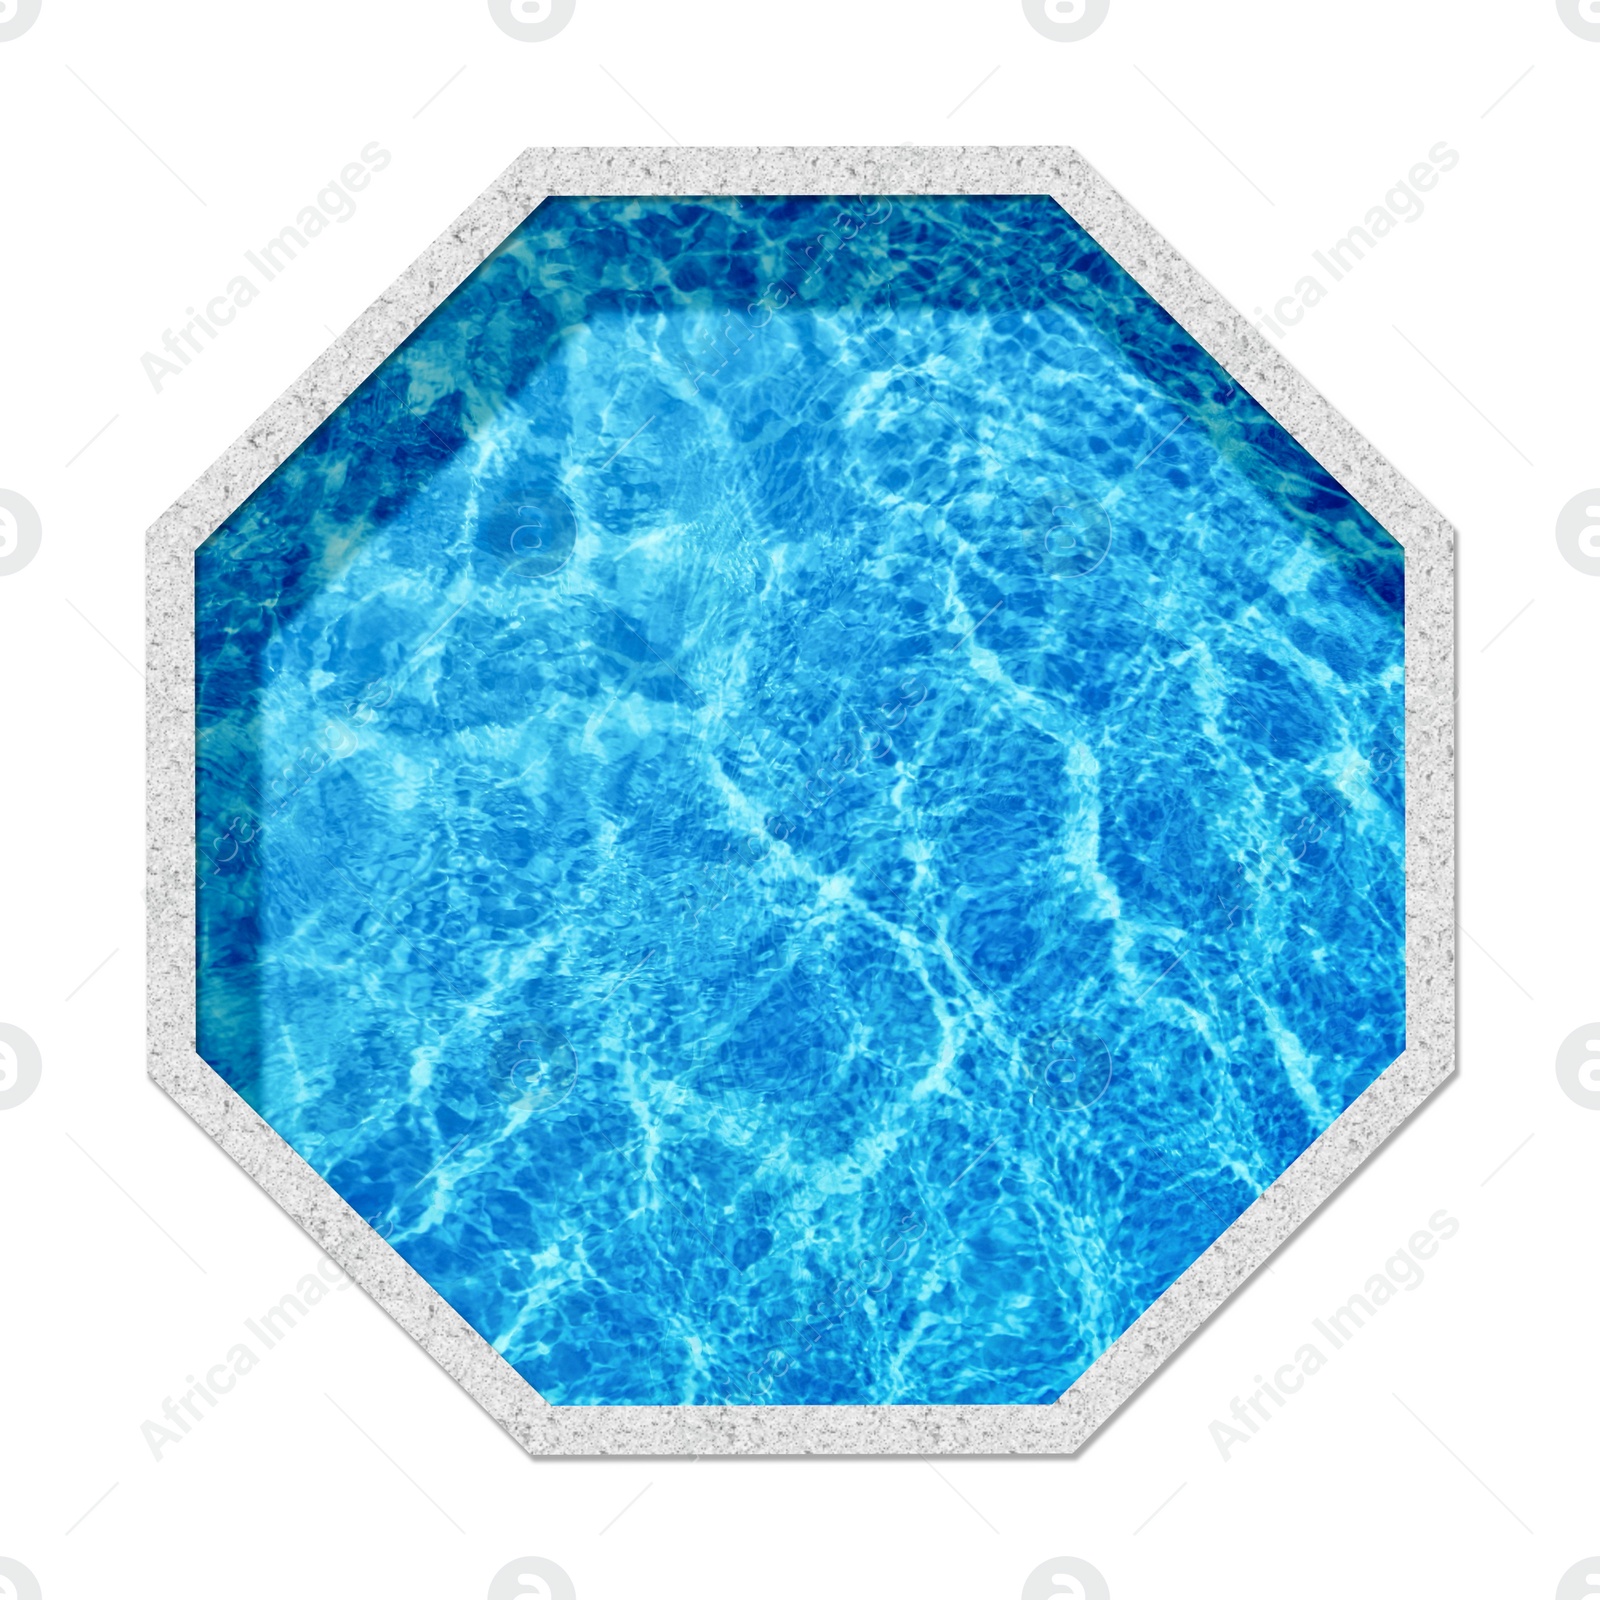 Image of Octagon shaped swimming pool on white background, top view